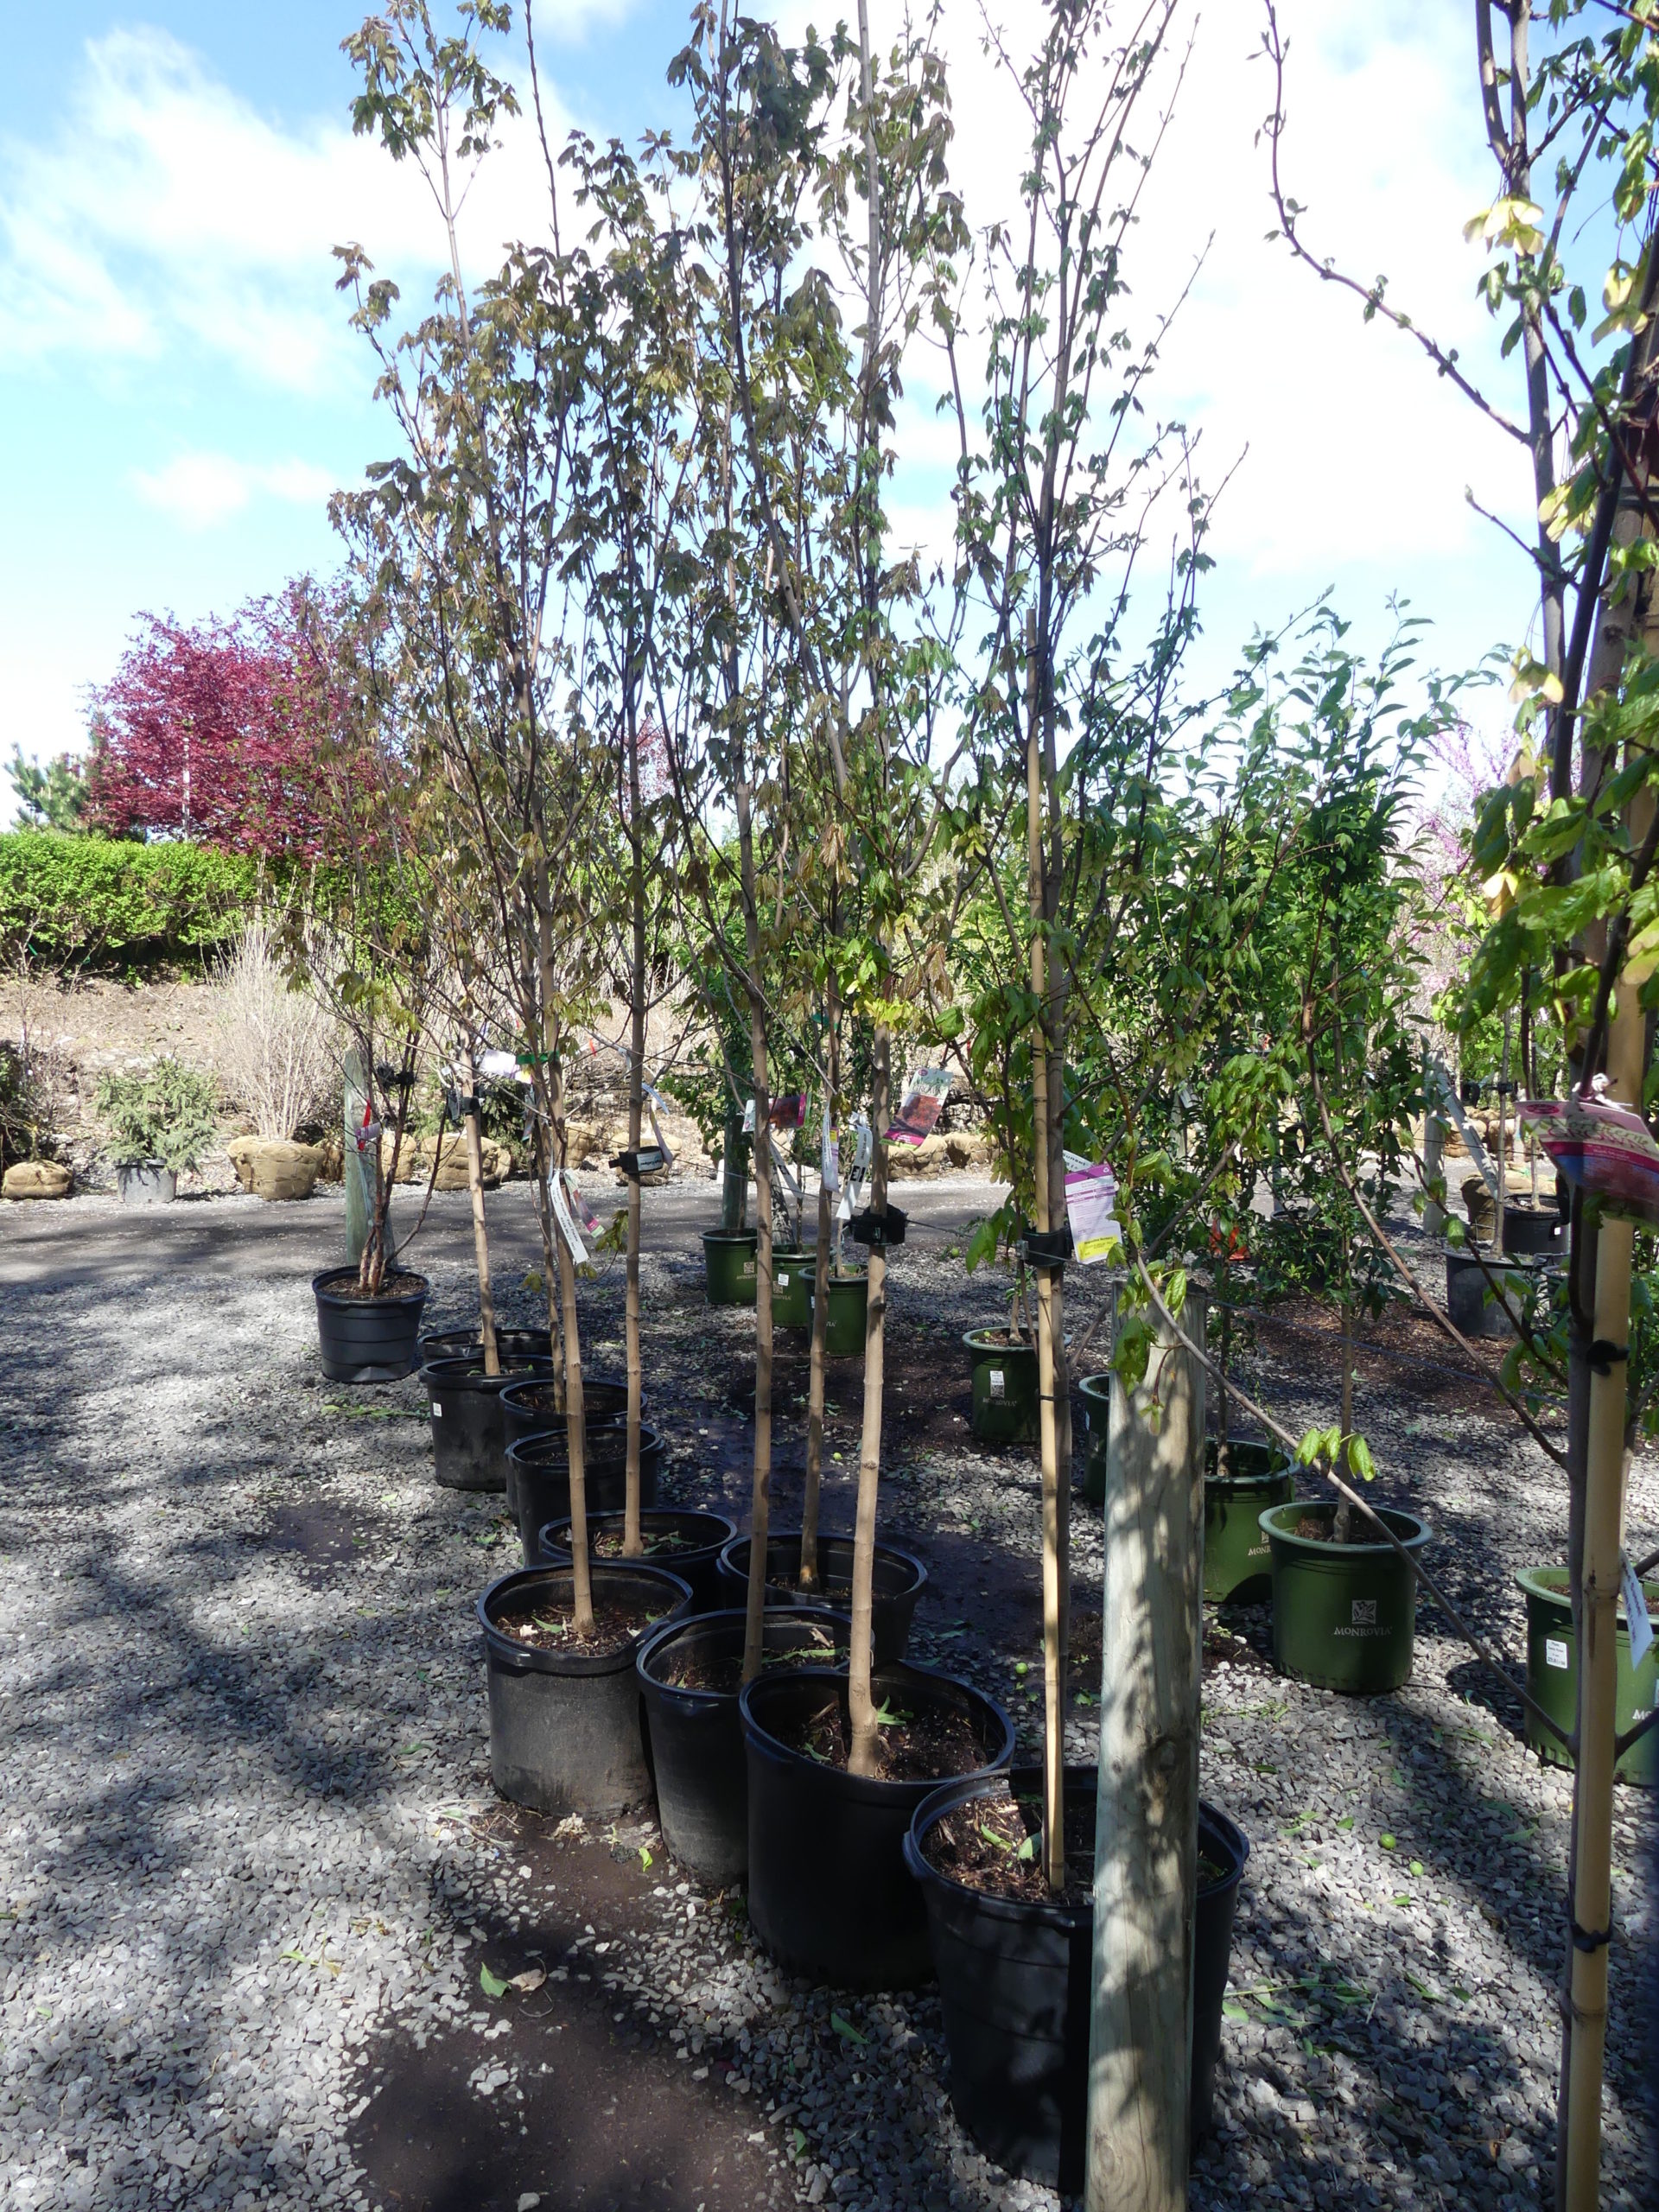 These container-grown maples are not expensive but their form and pruning leaves much to be desired. Container-grown trees and shrubs need special care when planting or the roots will continue to grow in circles, often resulting in years of decline before failure.